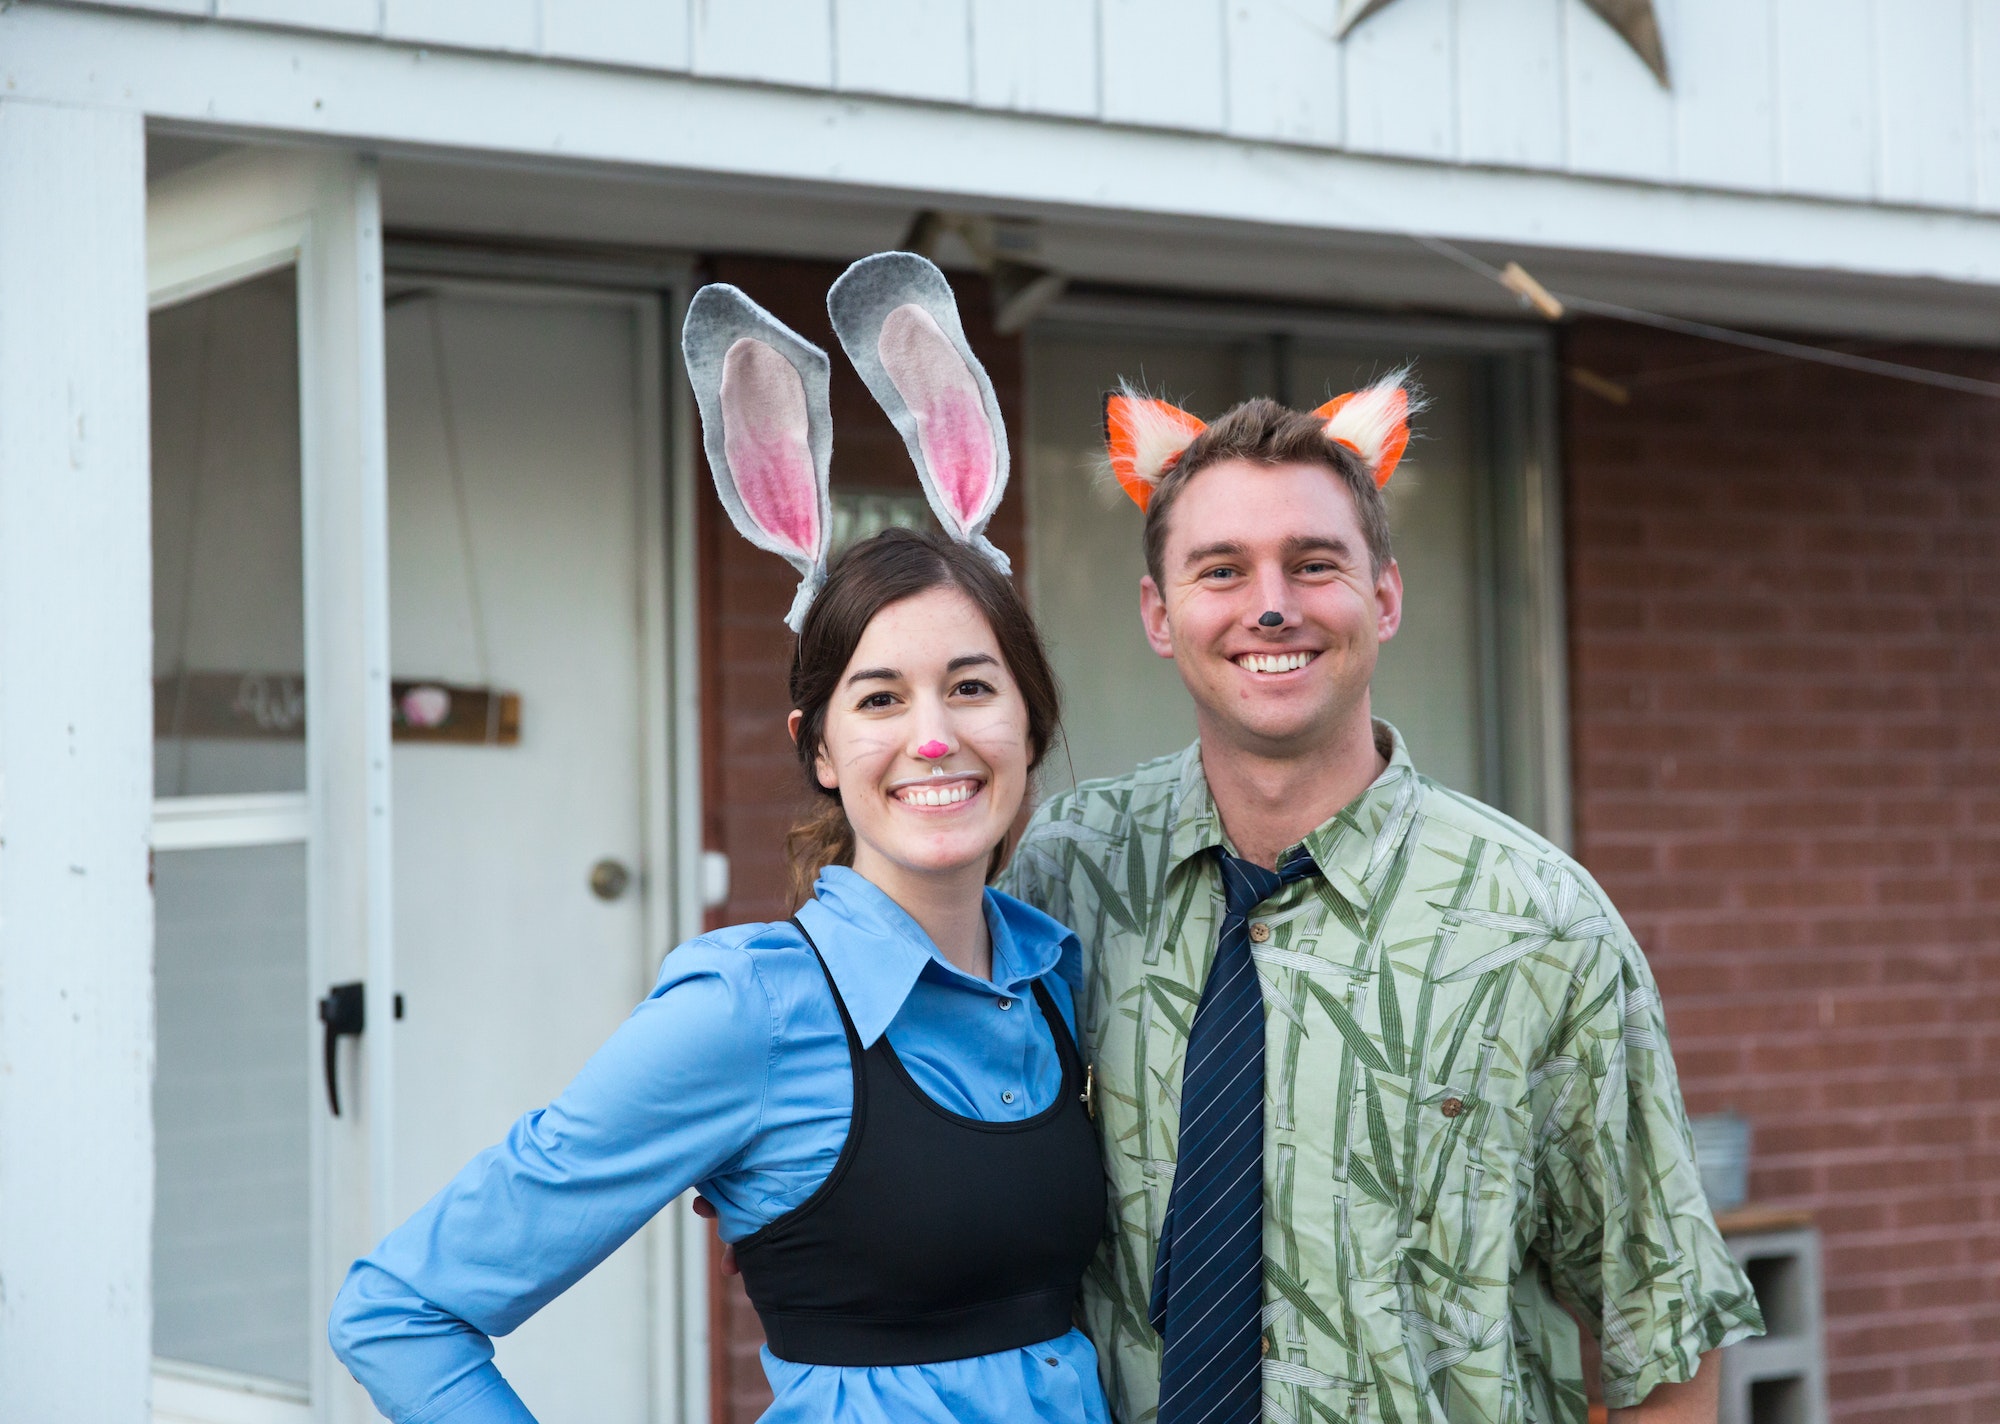 A young couple dressed up for Halloween